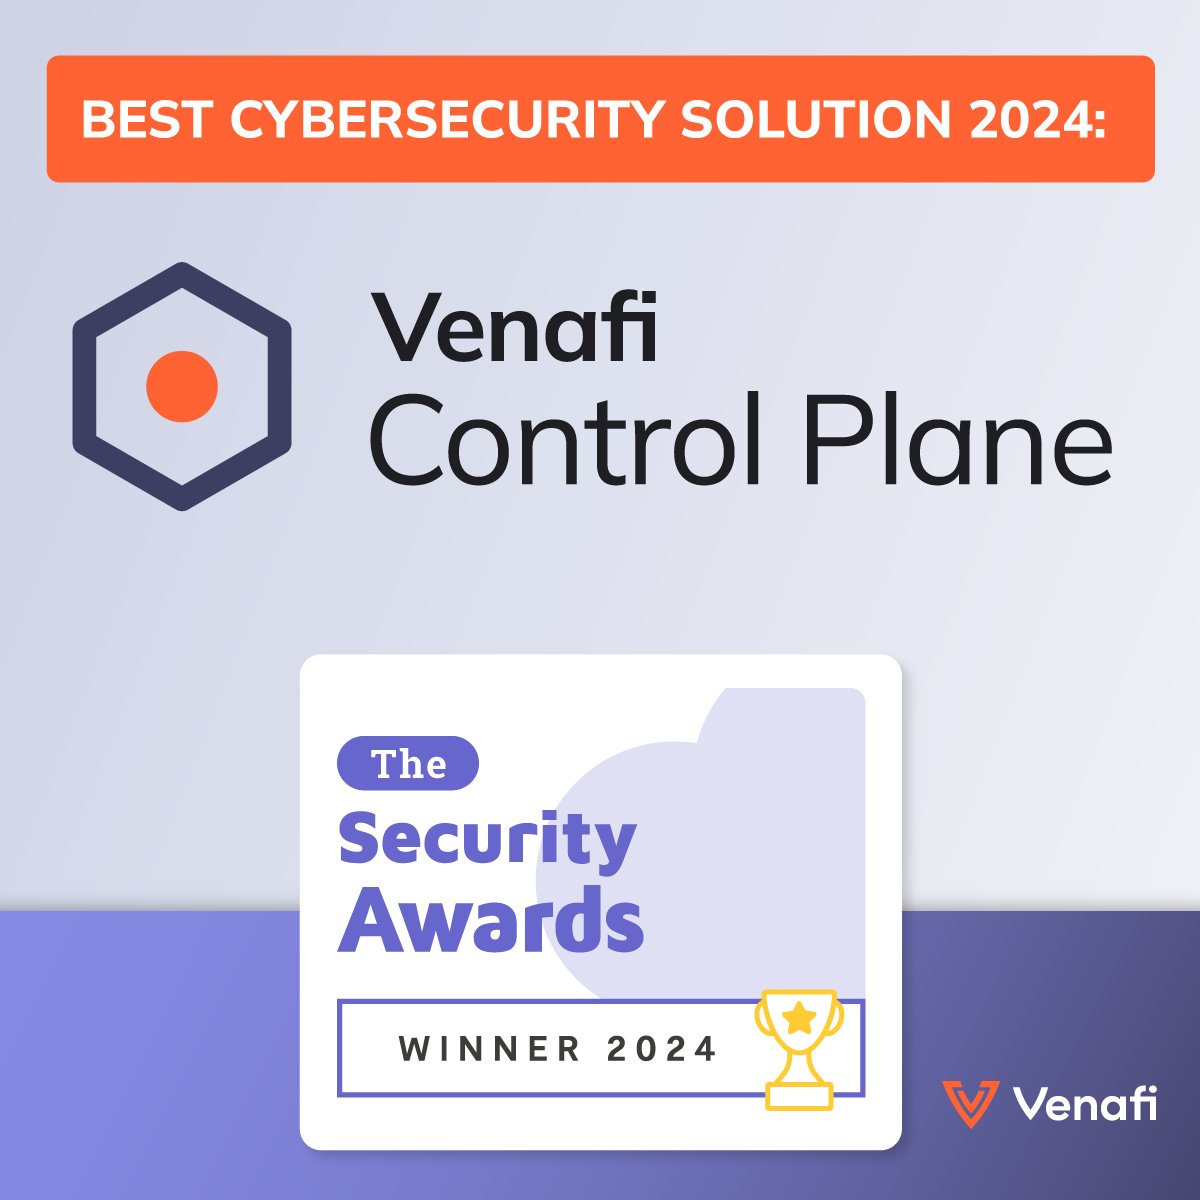 Exciting News! 🏆🏆 Venafi Control Plane has been named the Best Cybersecurity Solution at the 2024 Cloud Security Awards. A true testament to our innovation in cloud-based security! @Cloud_Awards